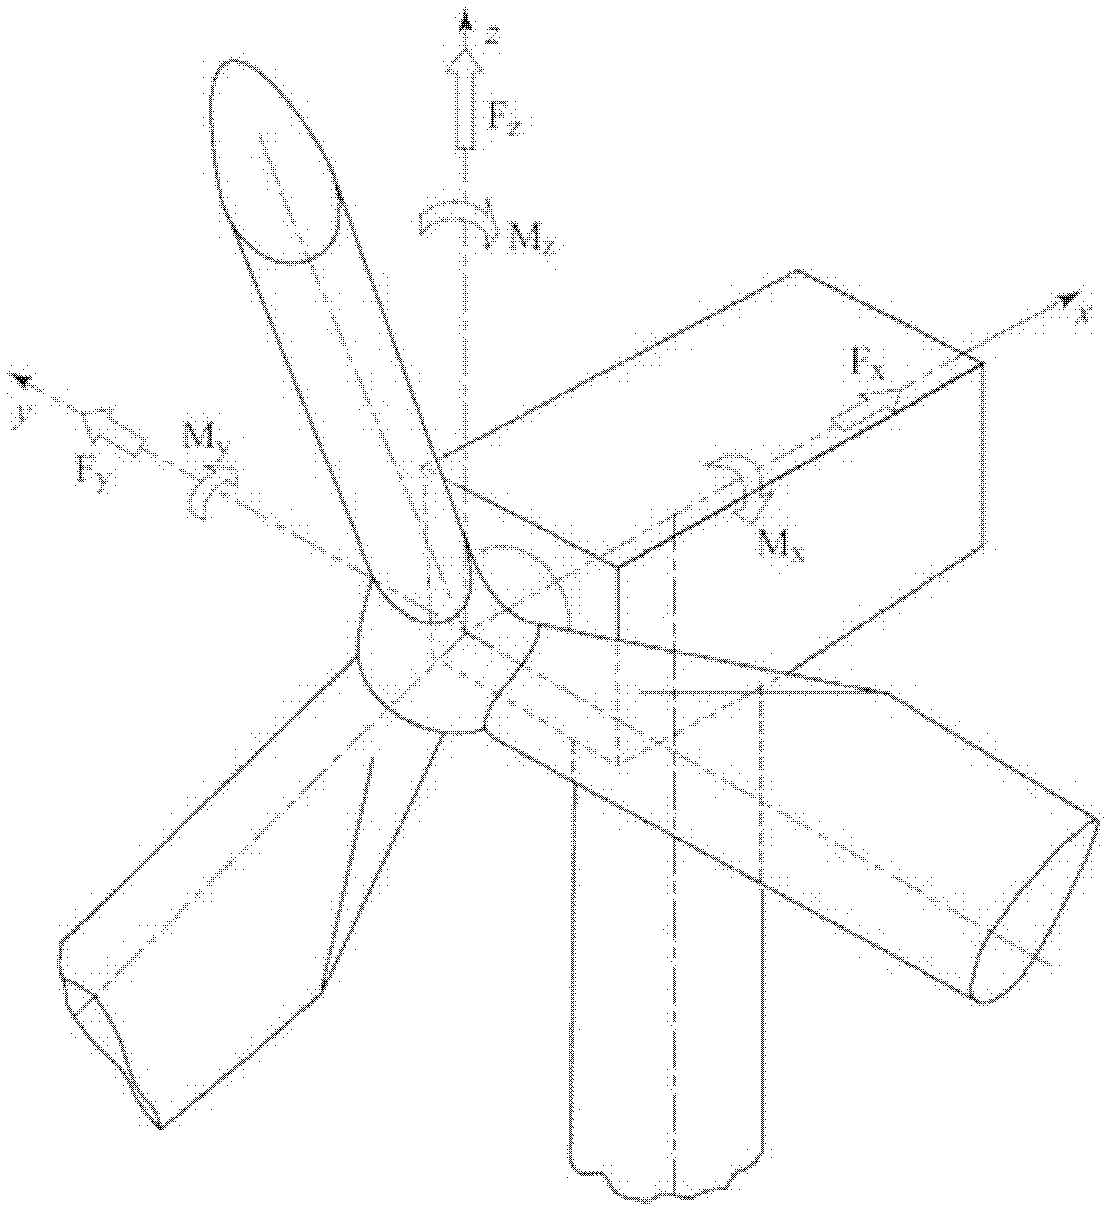 Multi-degree-of-freedom dynamic loading device for simulating wind power and ocean current load